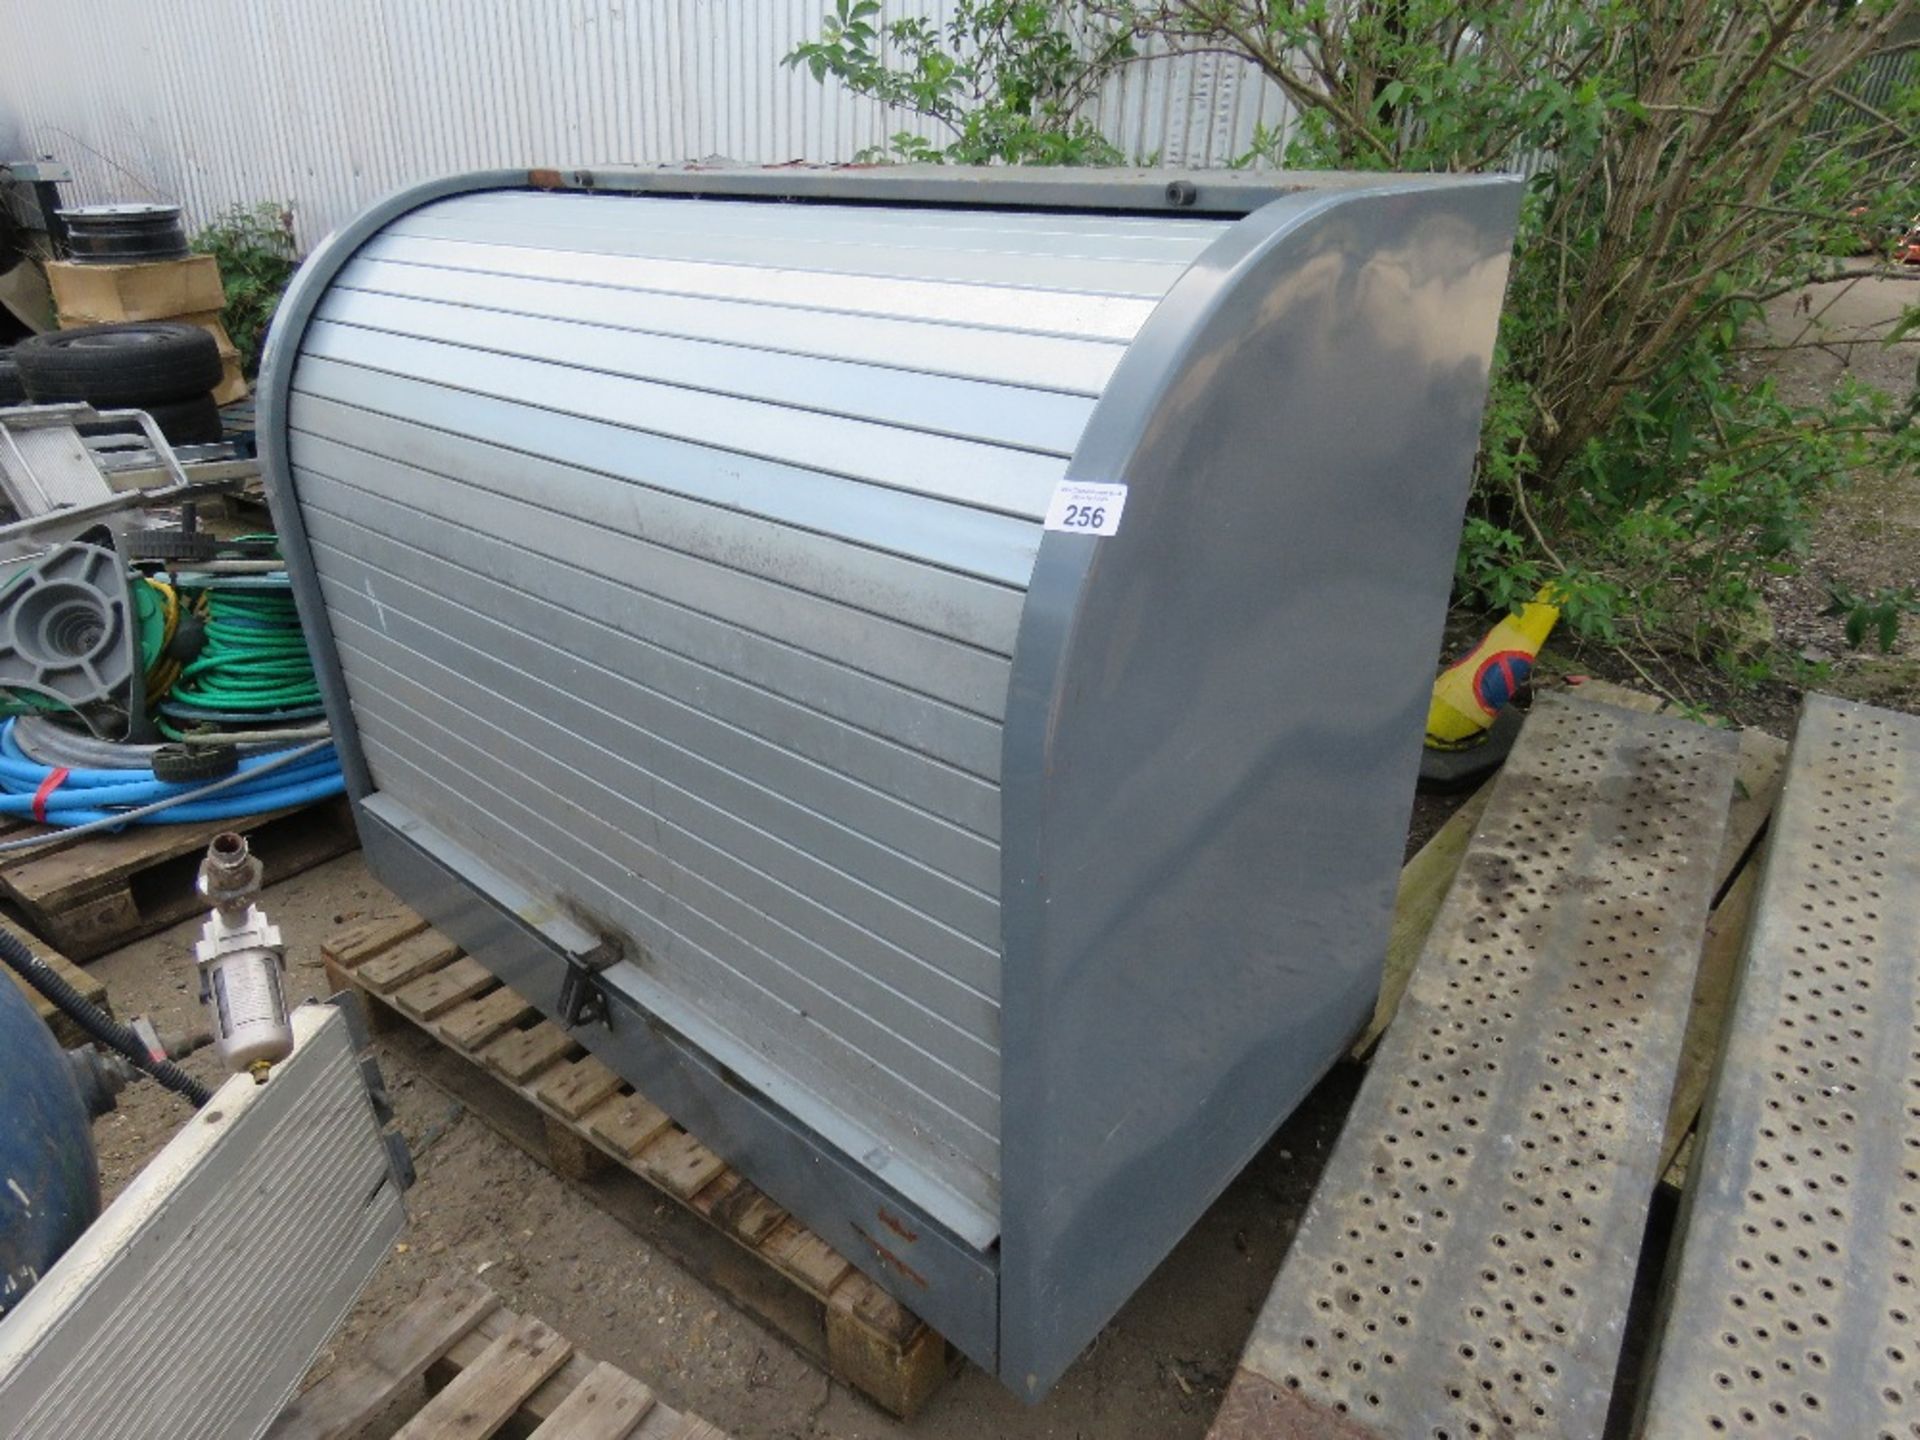 STORAGE CABINET, 5FT WIDTH APPROX WITH ROLLER SHUTTER FRONT.